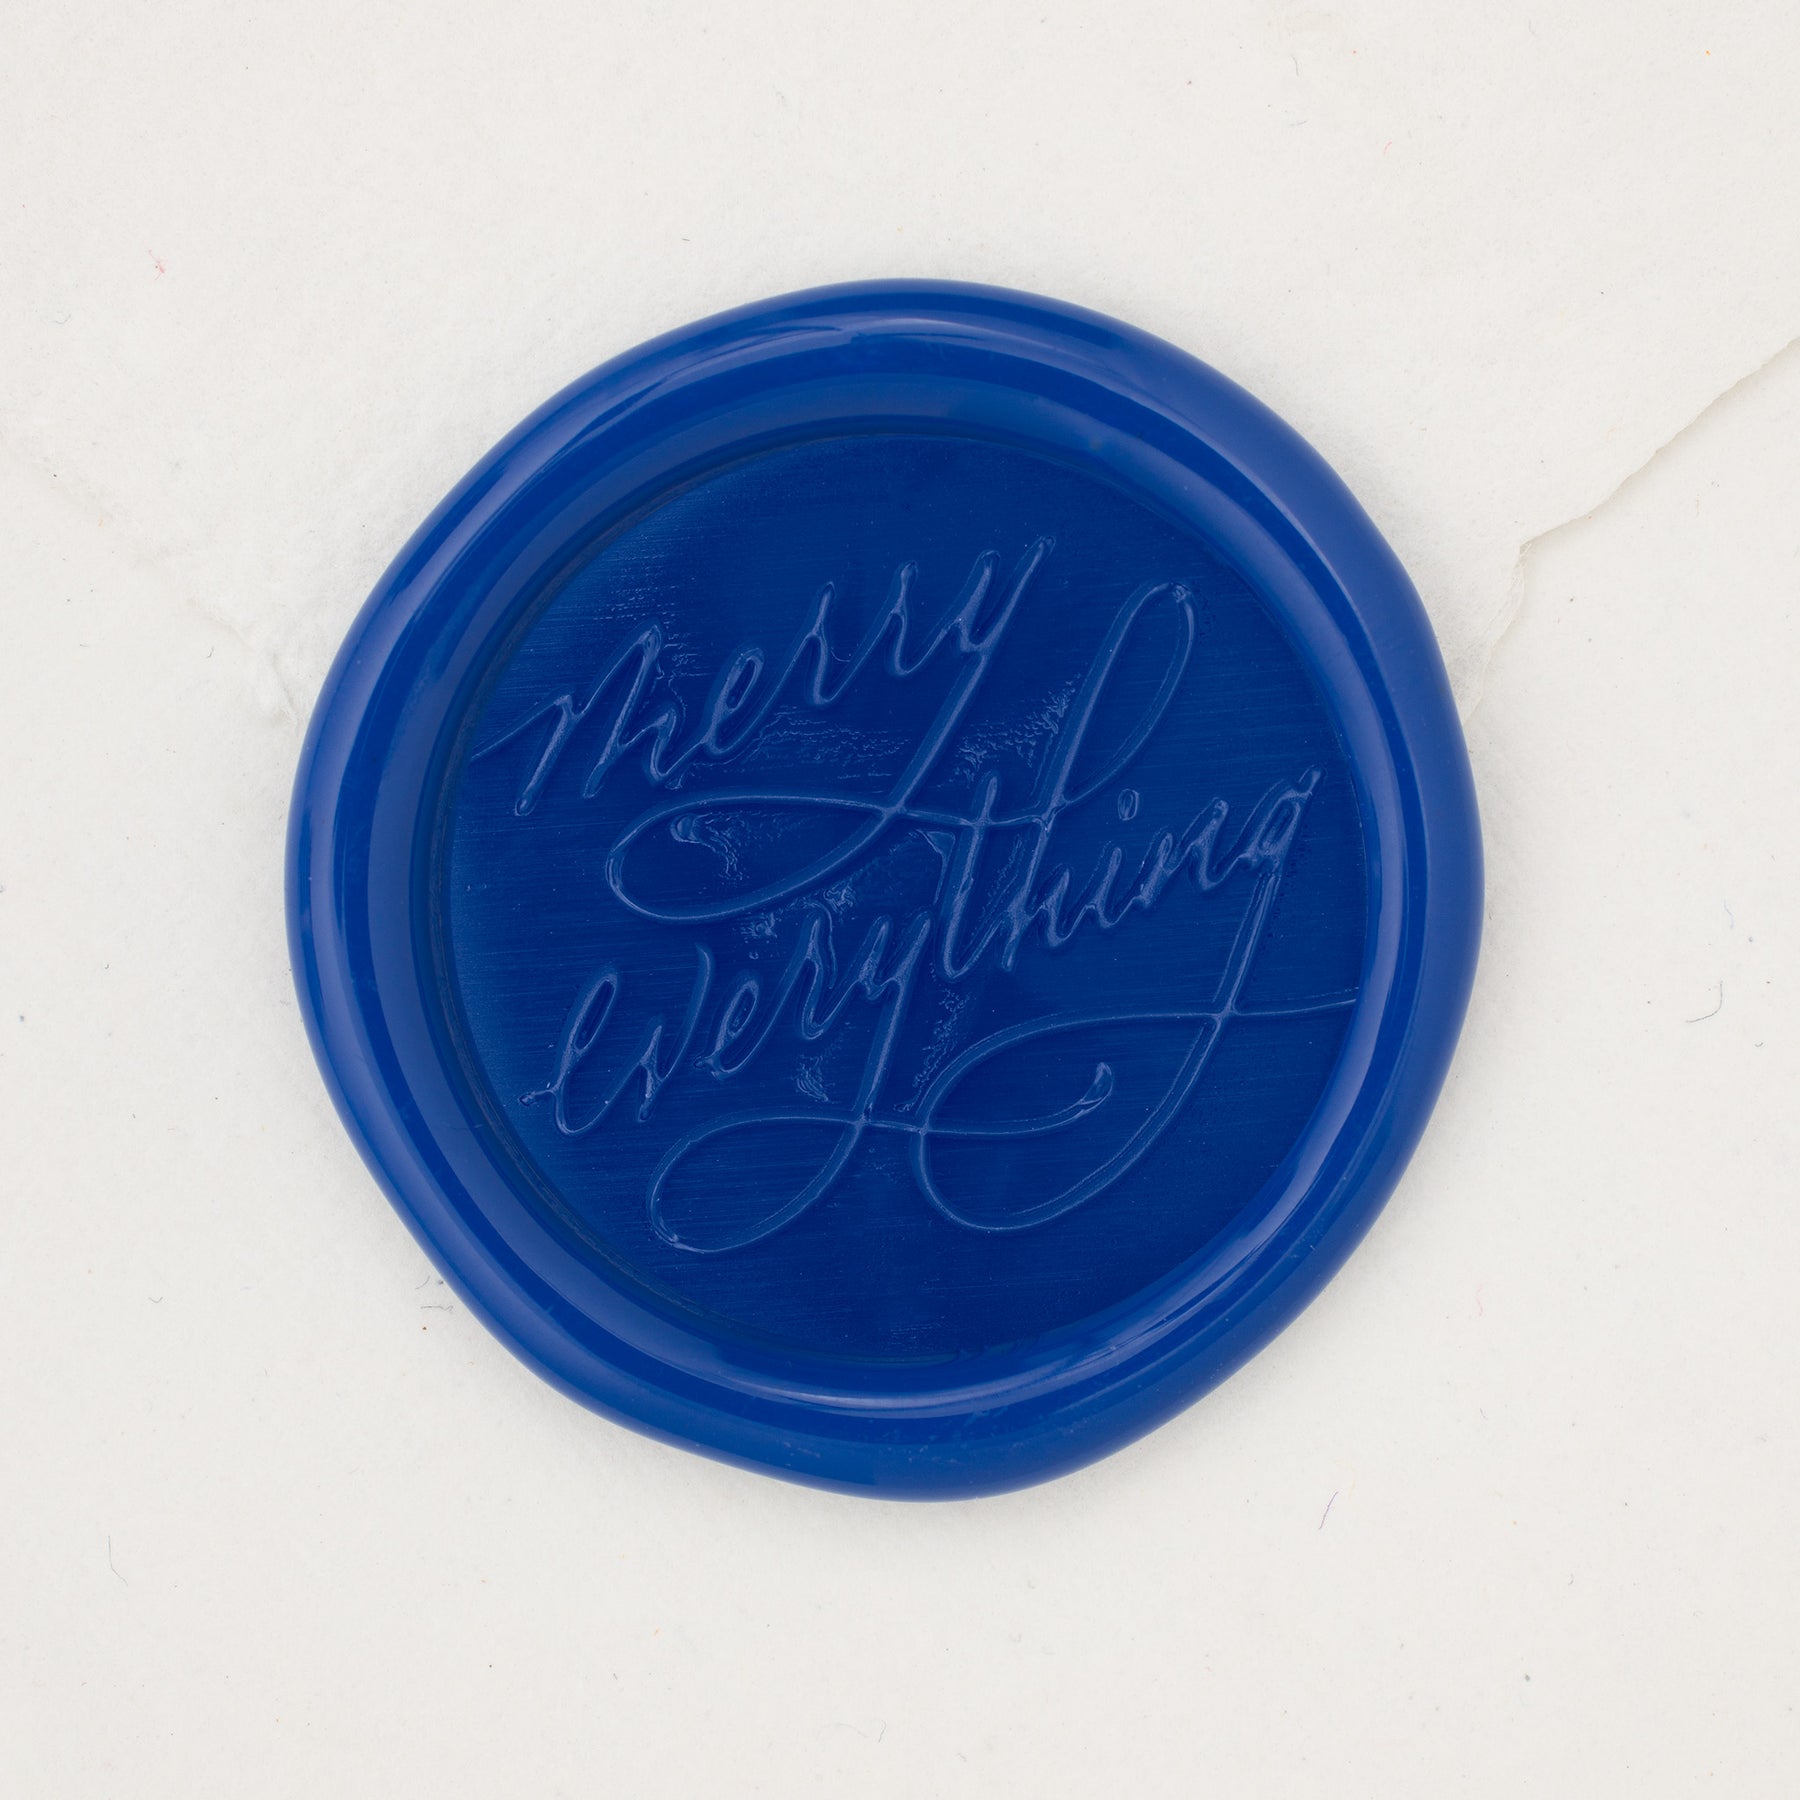 Merry Everything Wax Seals